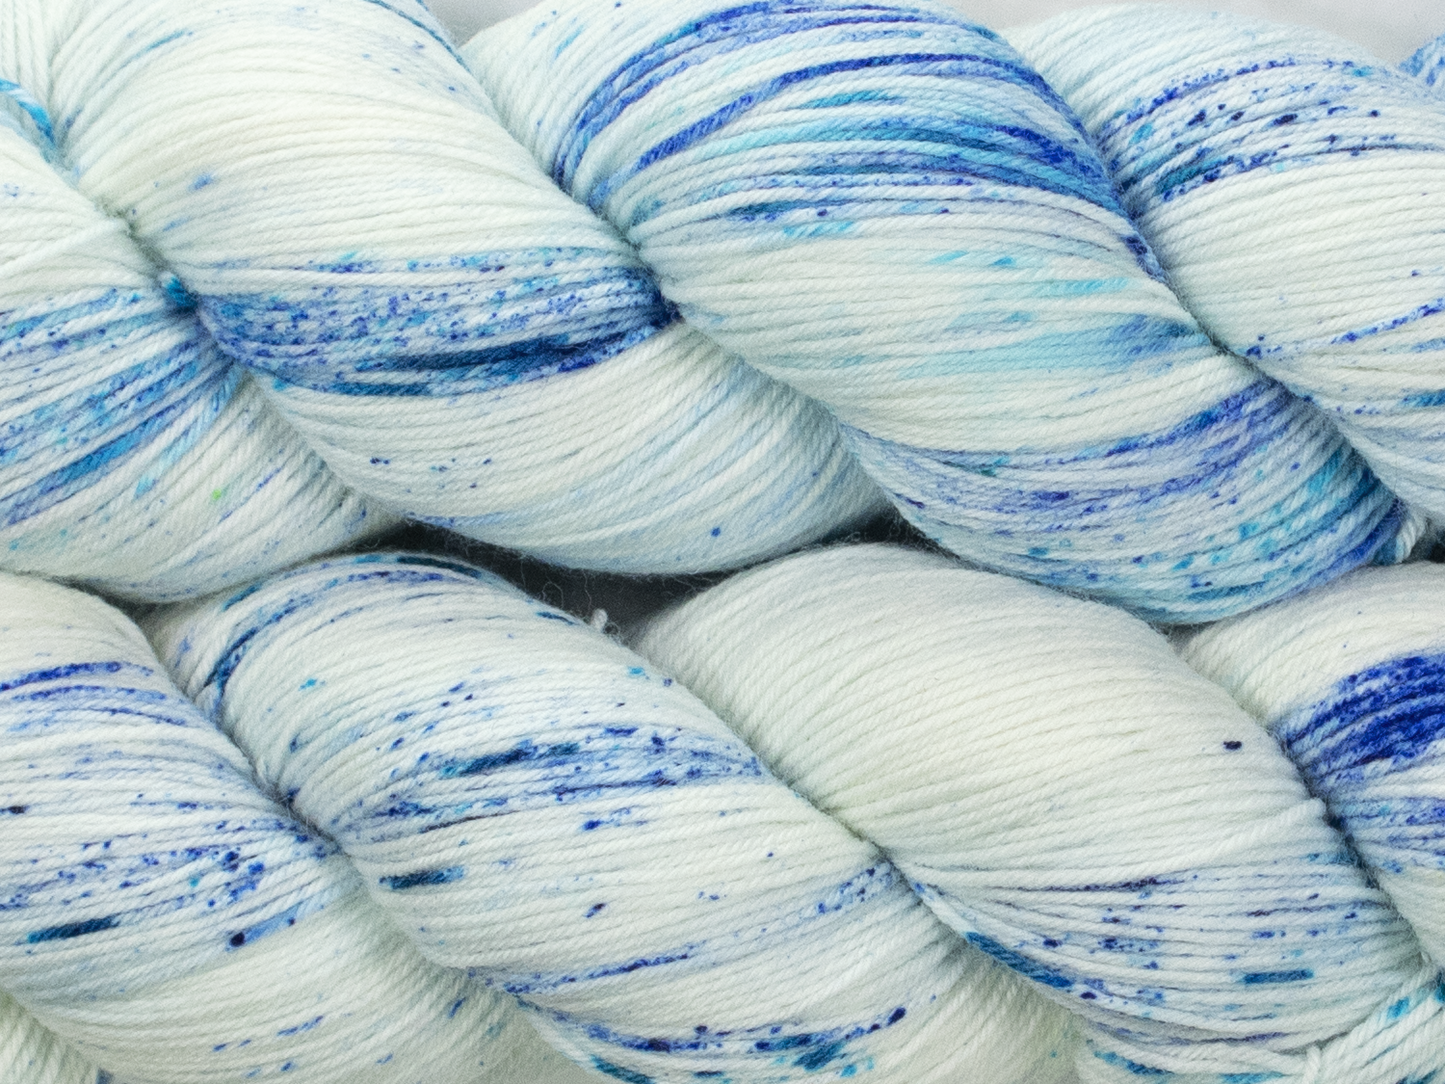 Photo of Fingering Weight yarn in "Blueberry Blender"